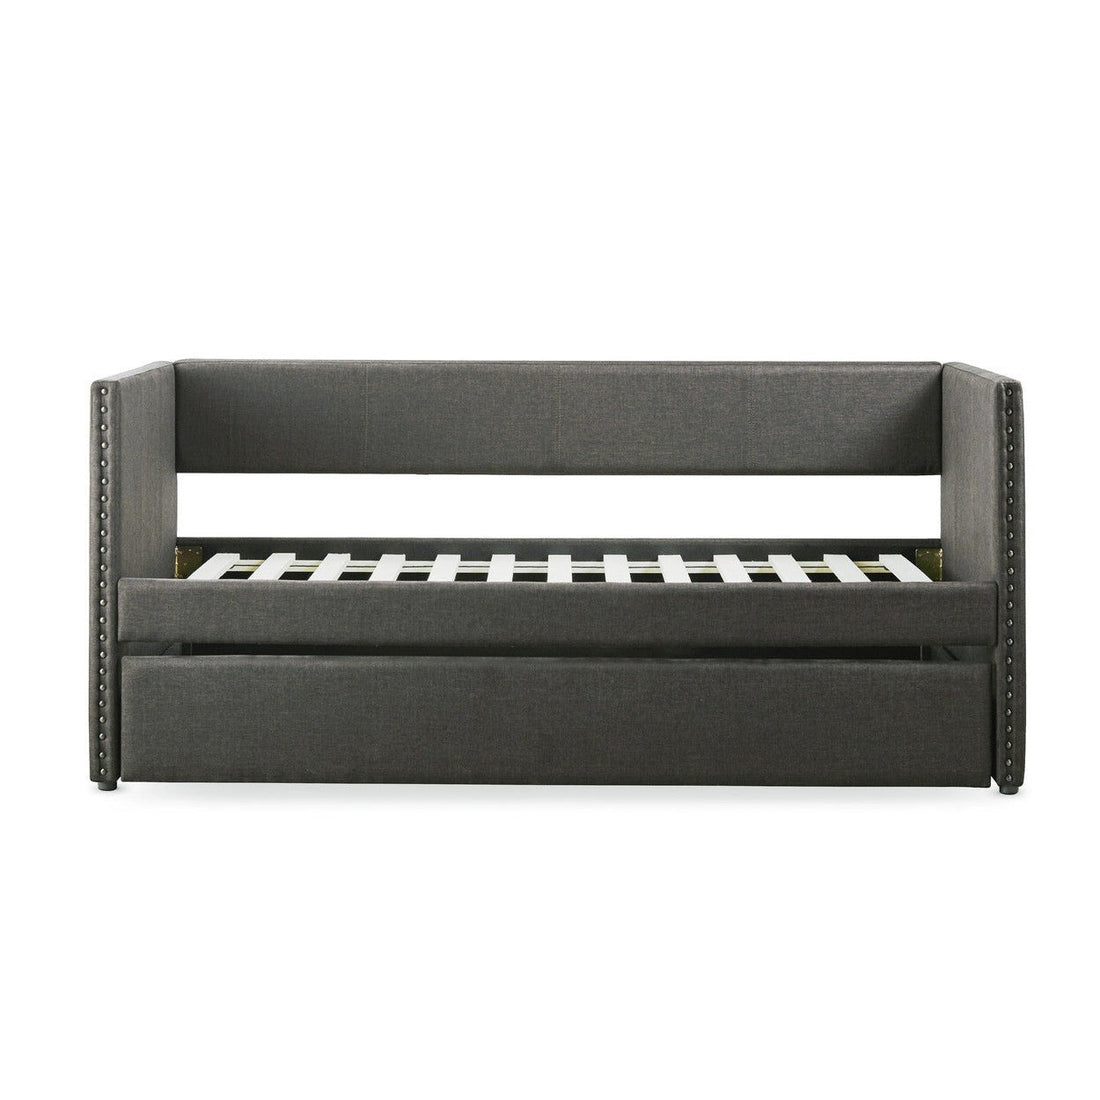 (2) DAYBED W/ NAIL HEAD, GREY FABRIC 4969GY*